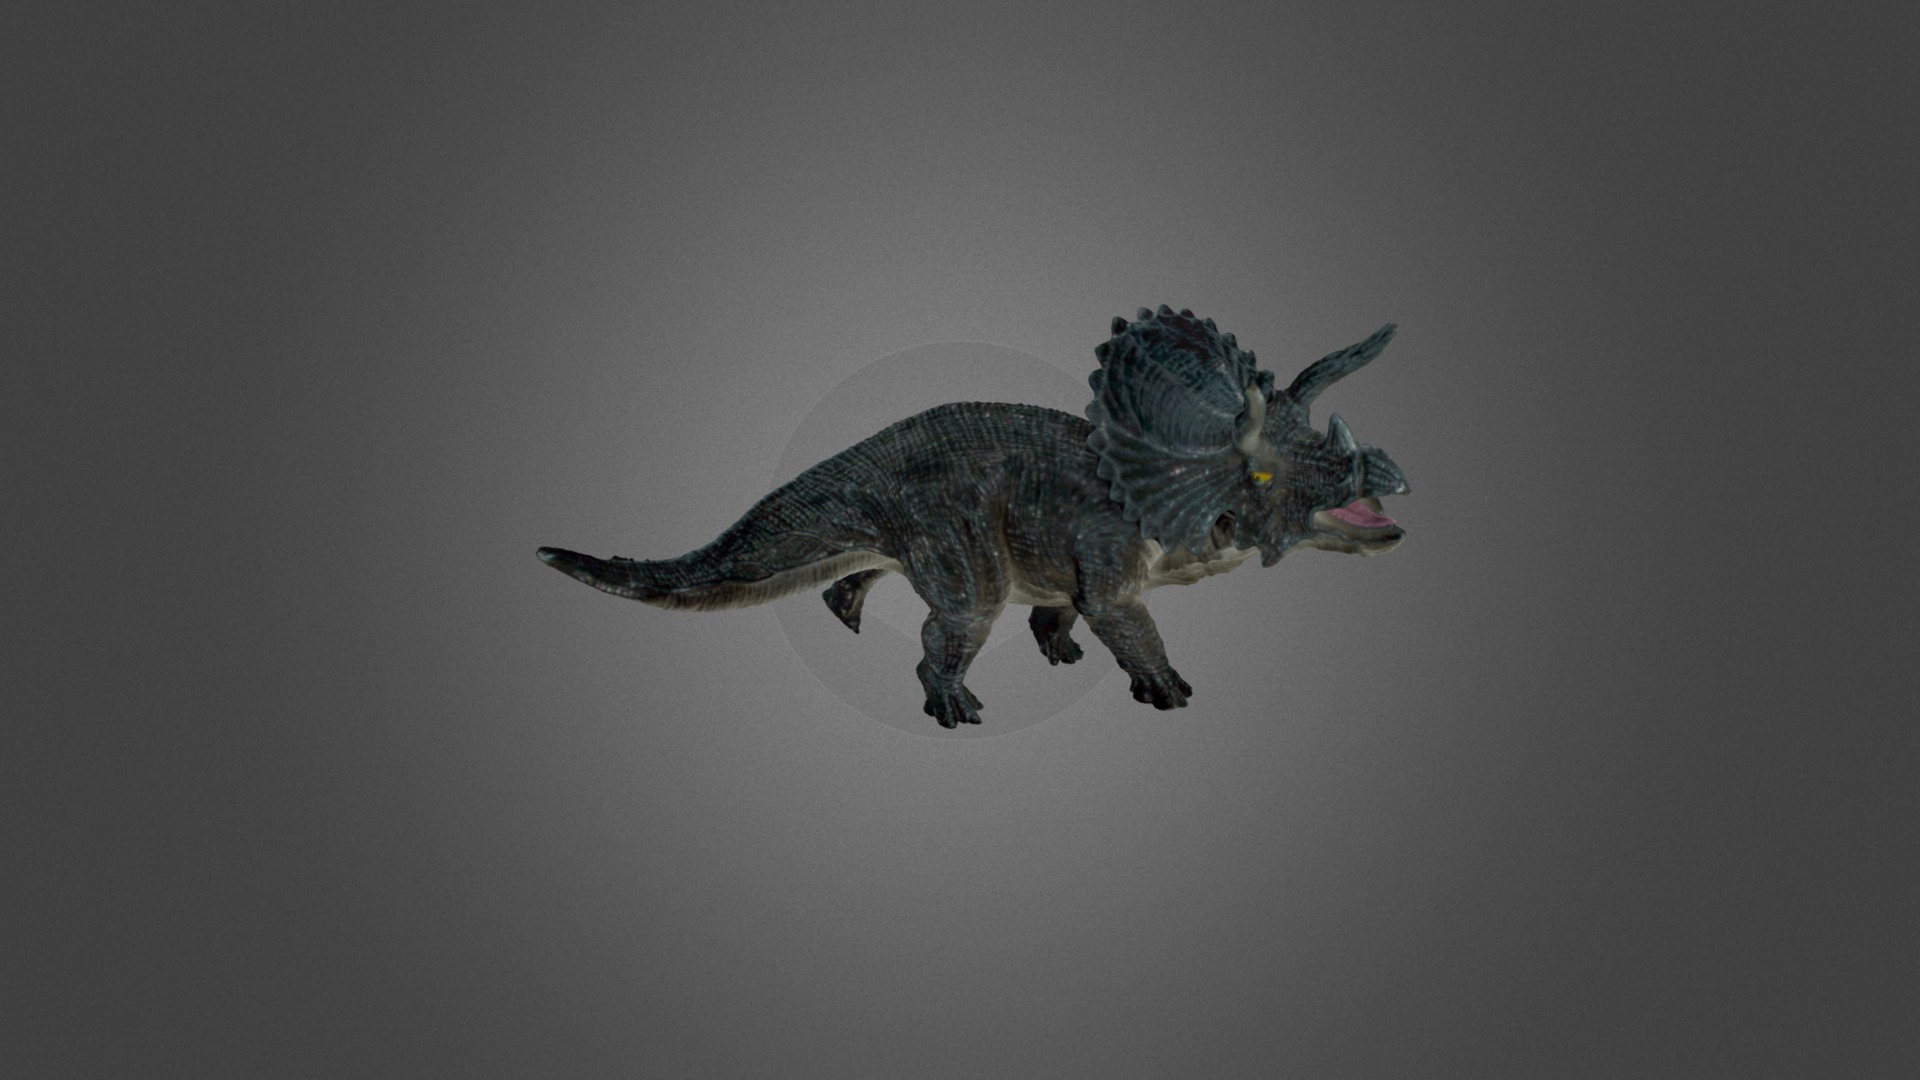 3D model Dinosaur Triceratops 01 - This is a 3D model of the Dinosaur Triceratops 01. The 3D model is about a toy dinosaur on a white surface.